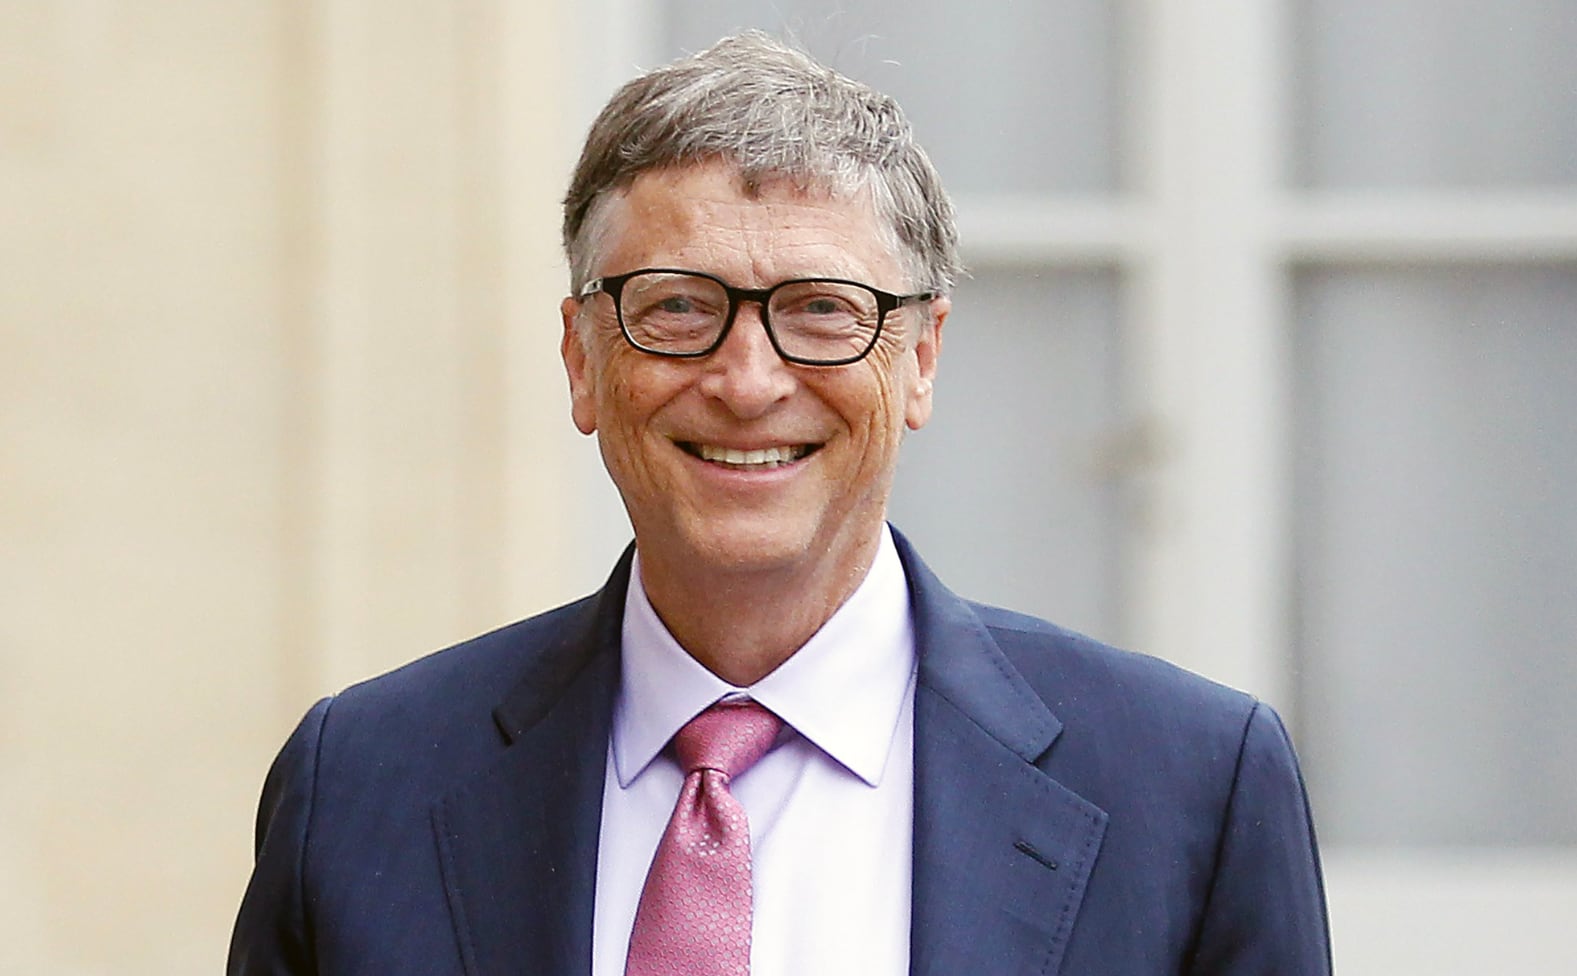 Bill Gates blasts cryptocurrency and NFTs, again, calls them '100% based on greater fool theory'